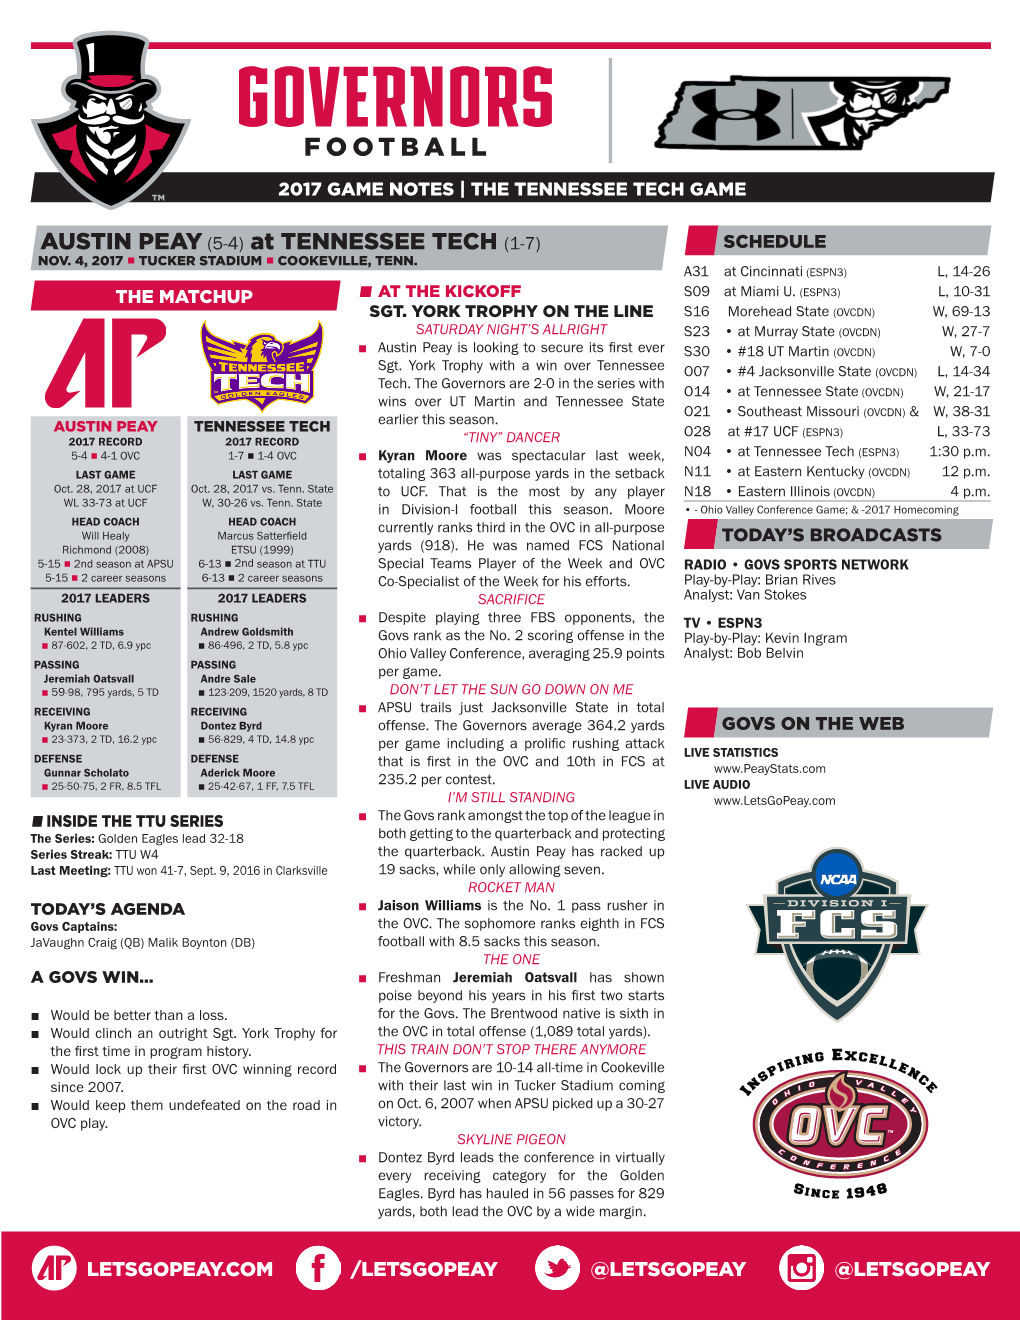 AUSTIN PEAY (5-4) at TENNESSEE TECH (1-7) SCHEDULE NOV